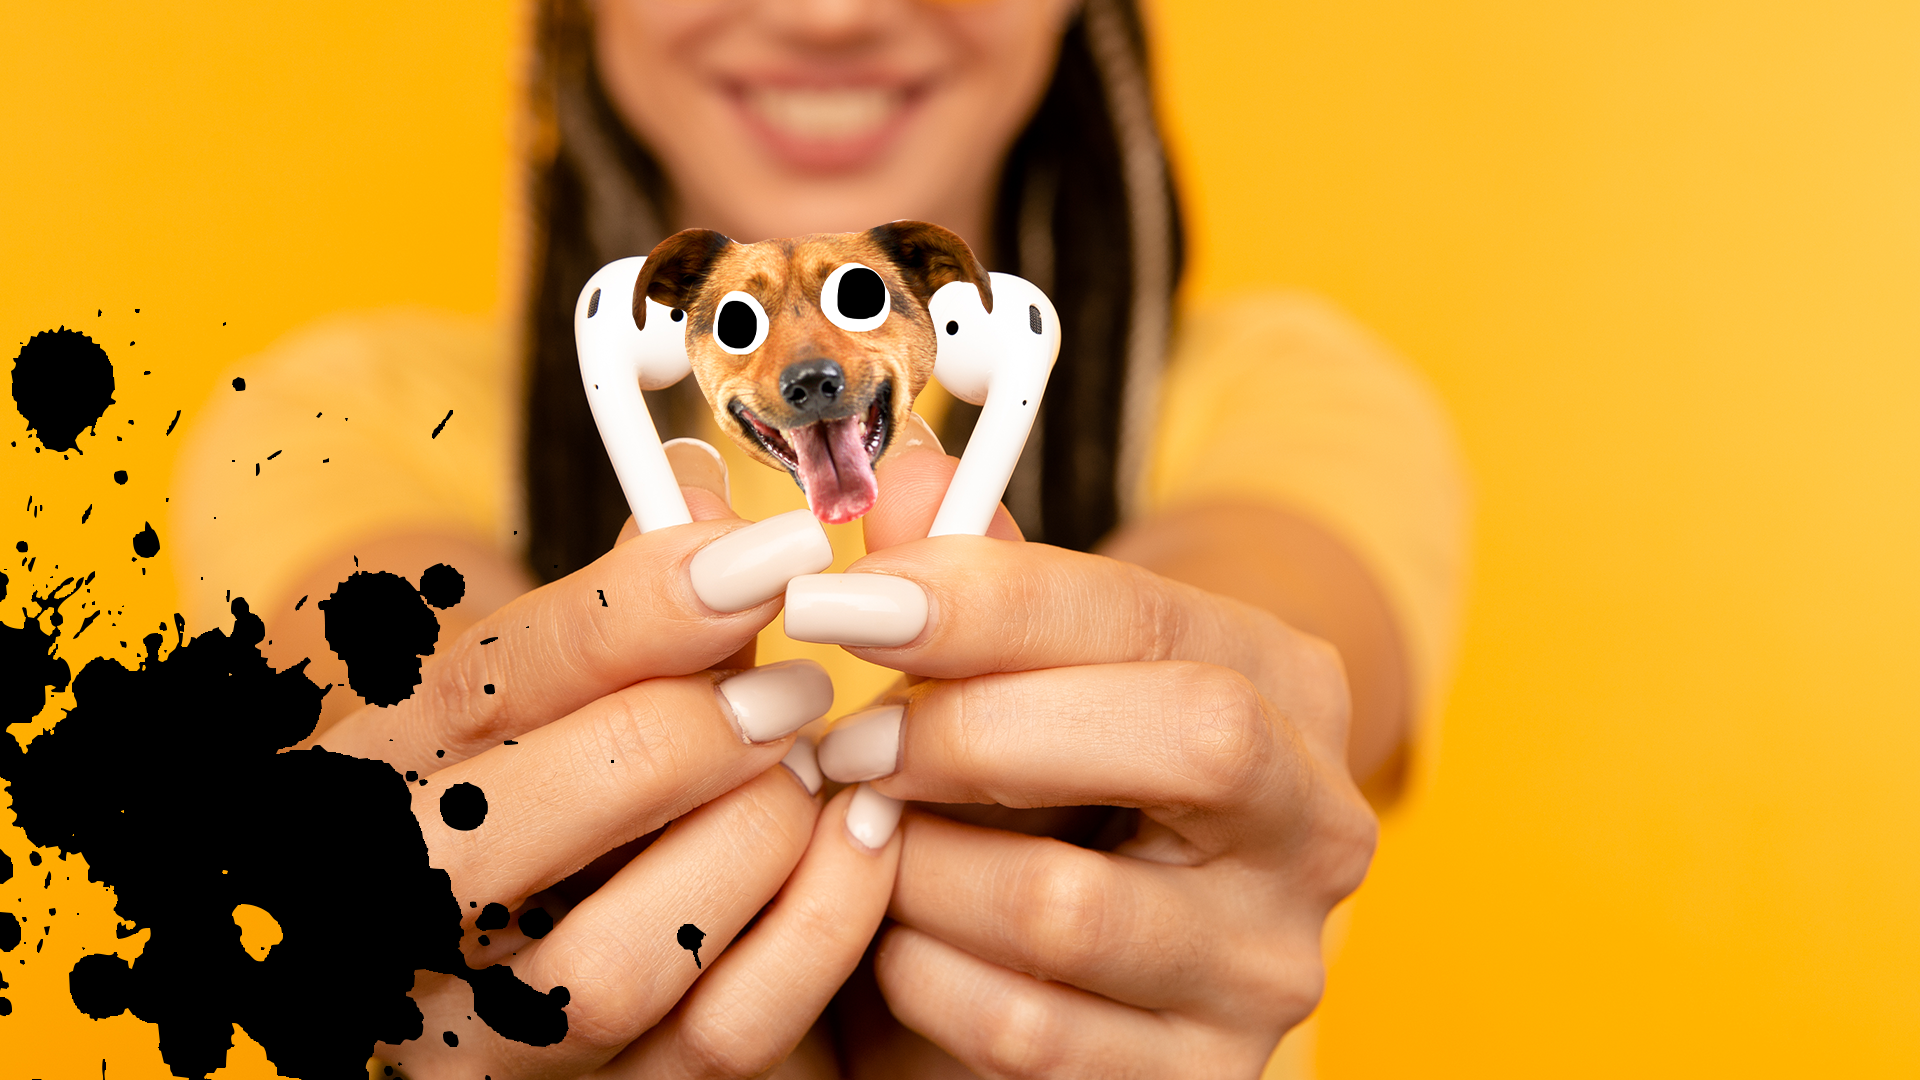 Woman on yellow background holding airpods with splat and dog face